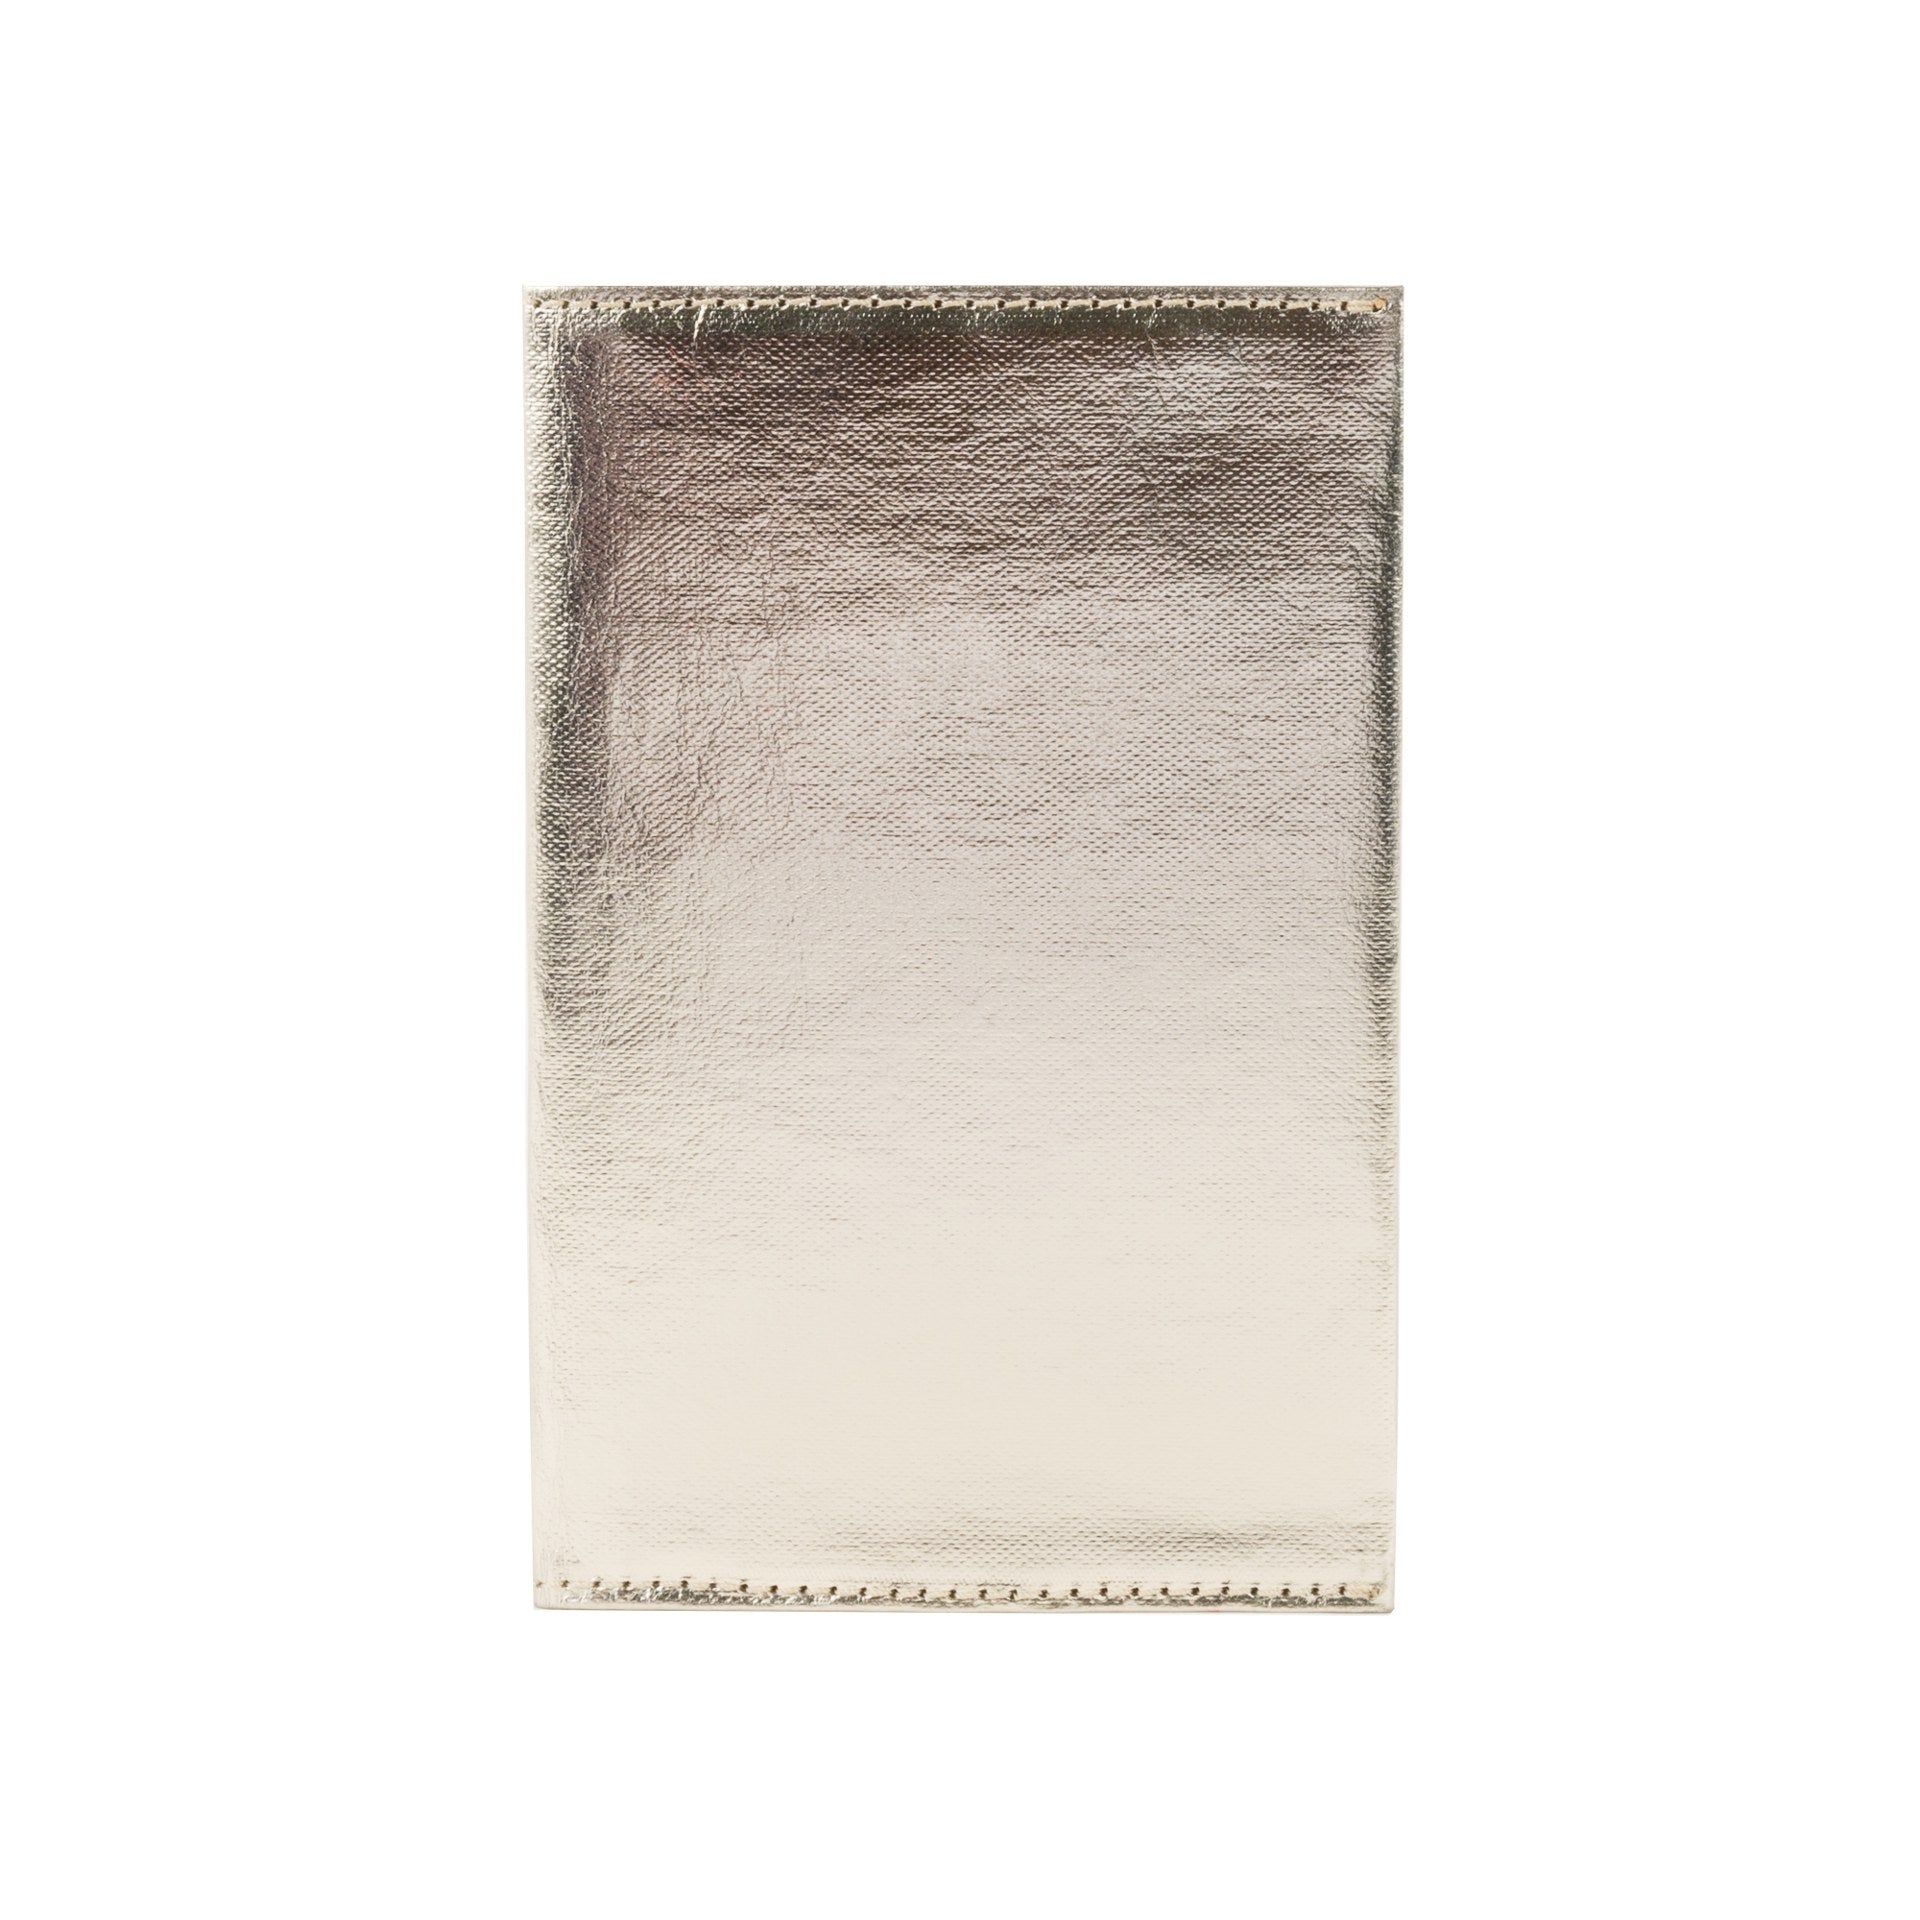 A large washable paper wallet is shown folded closed. The wallet is platinum metallic.